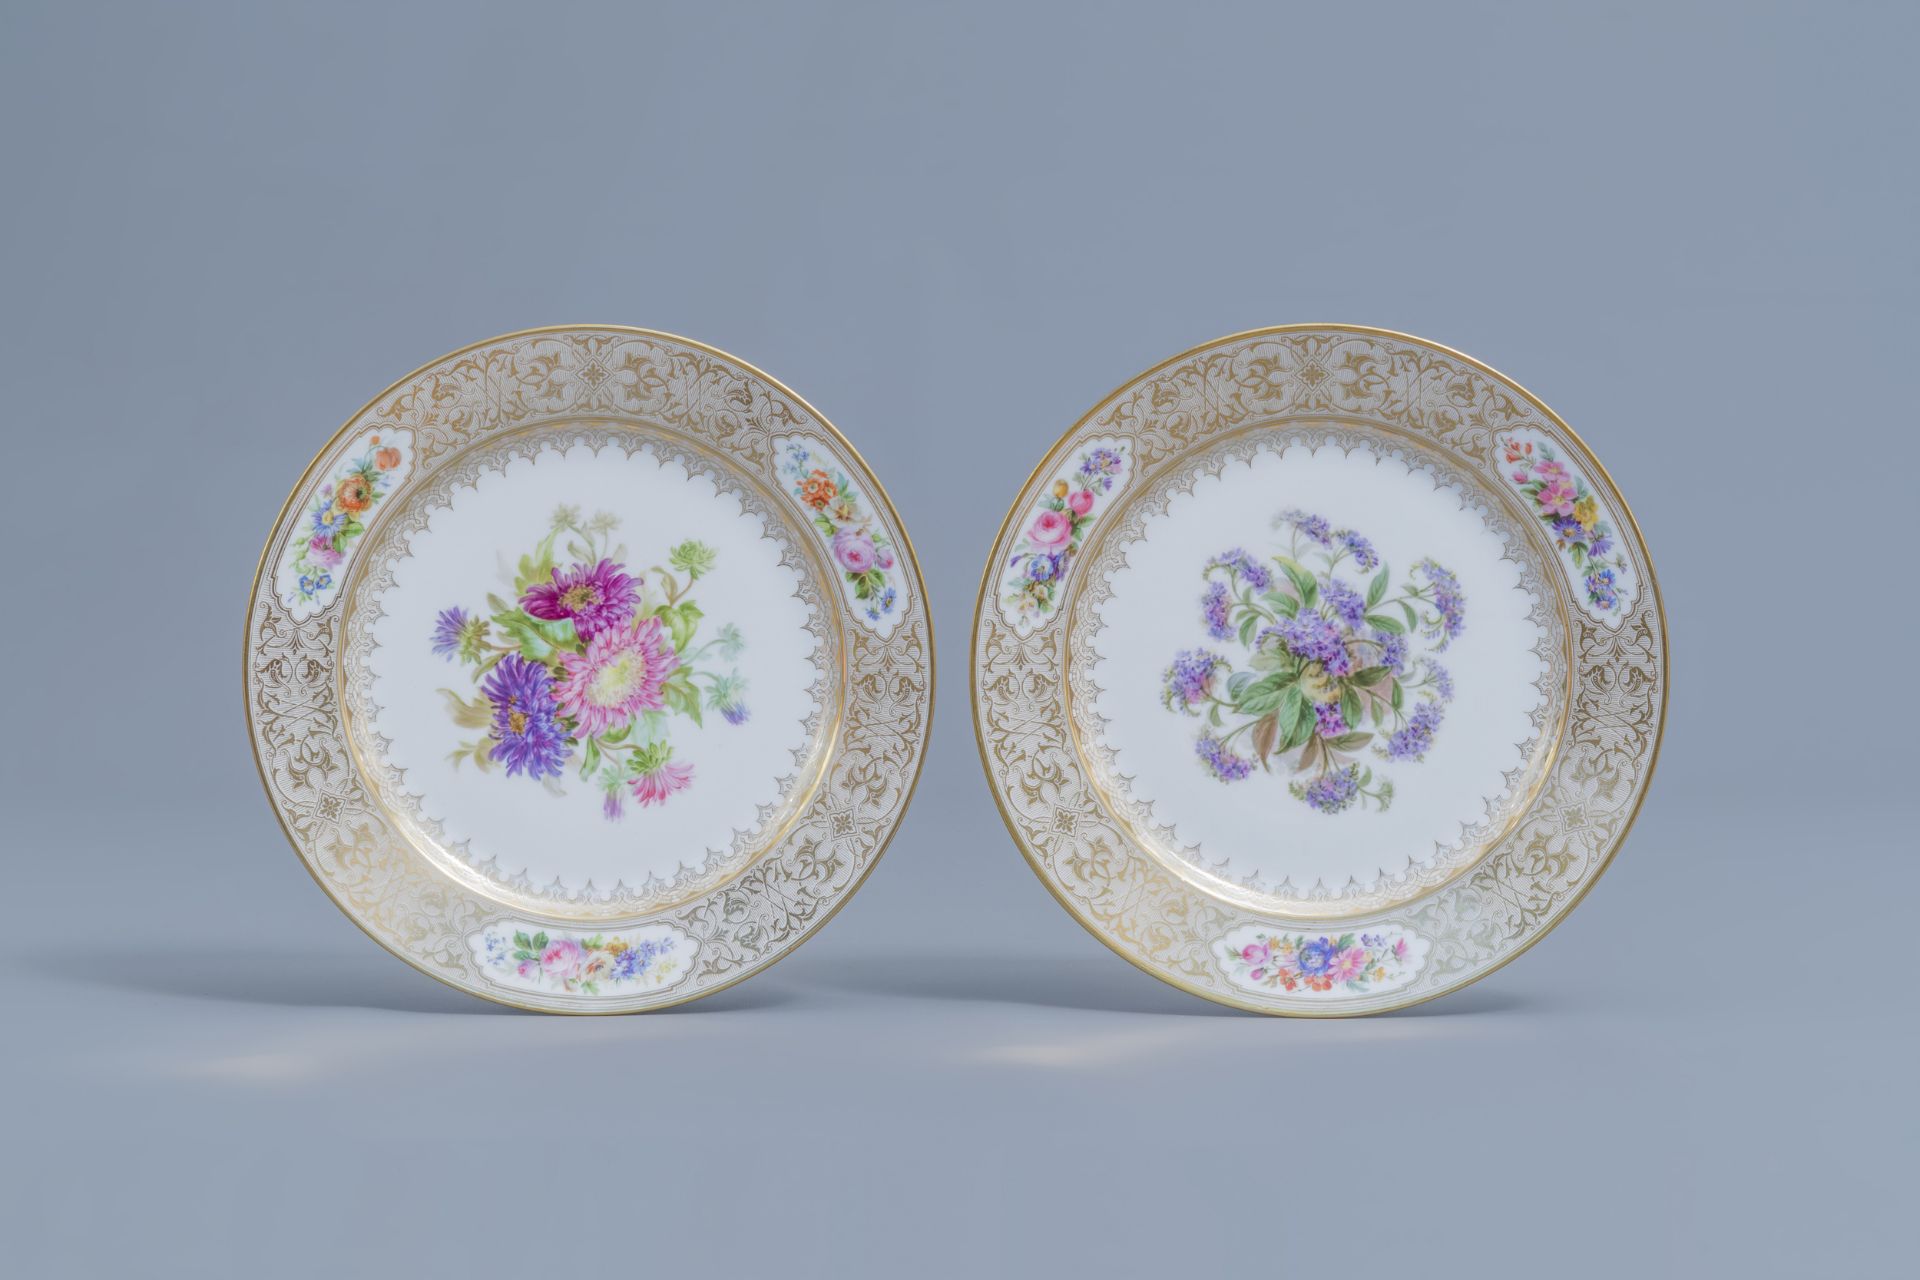 A set of eleven French plates with gilt and polychrome floral design, Svres mark, 19th C. - Image 19 of 22